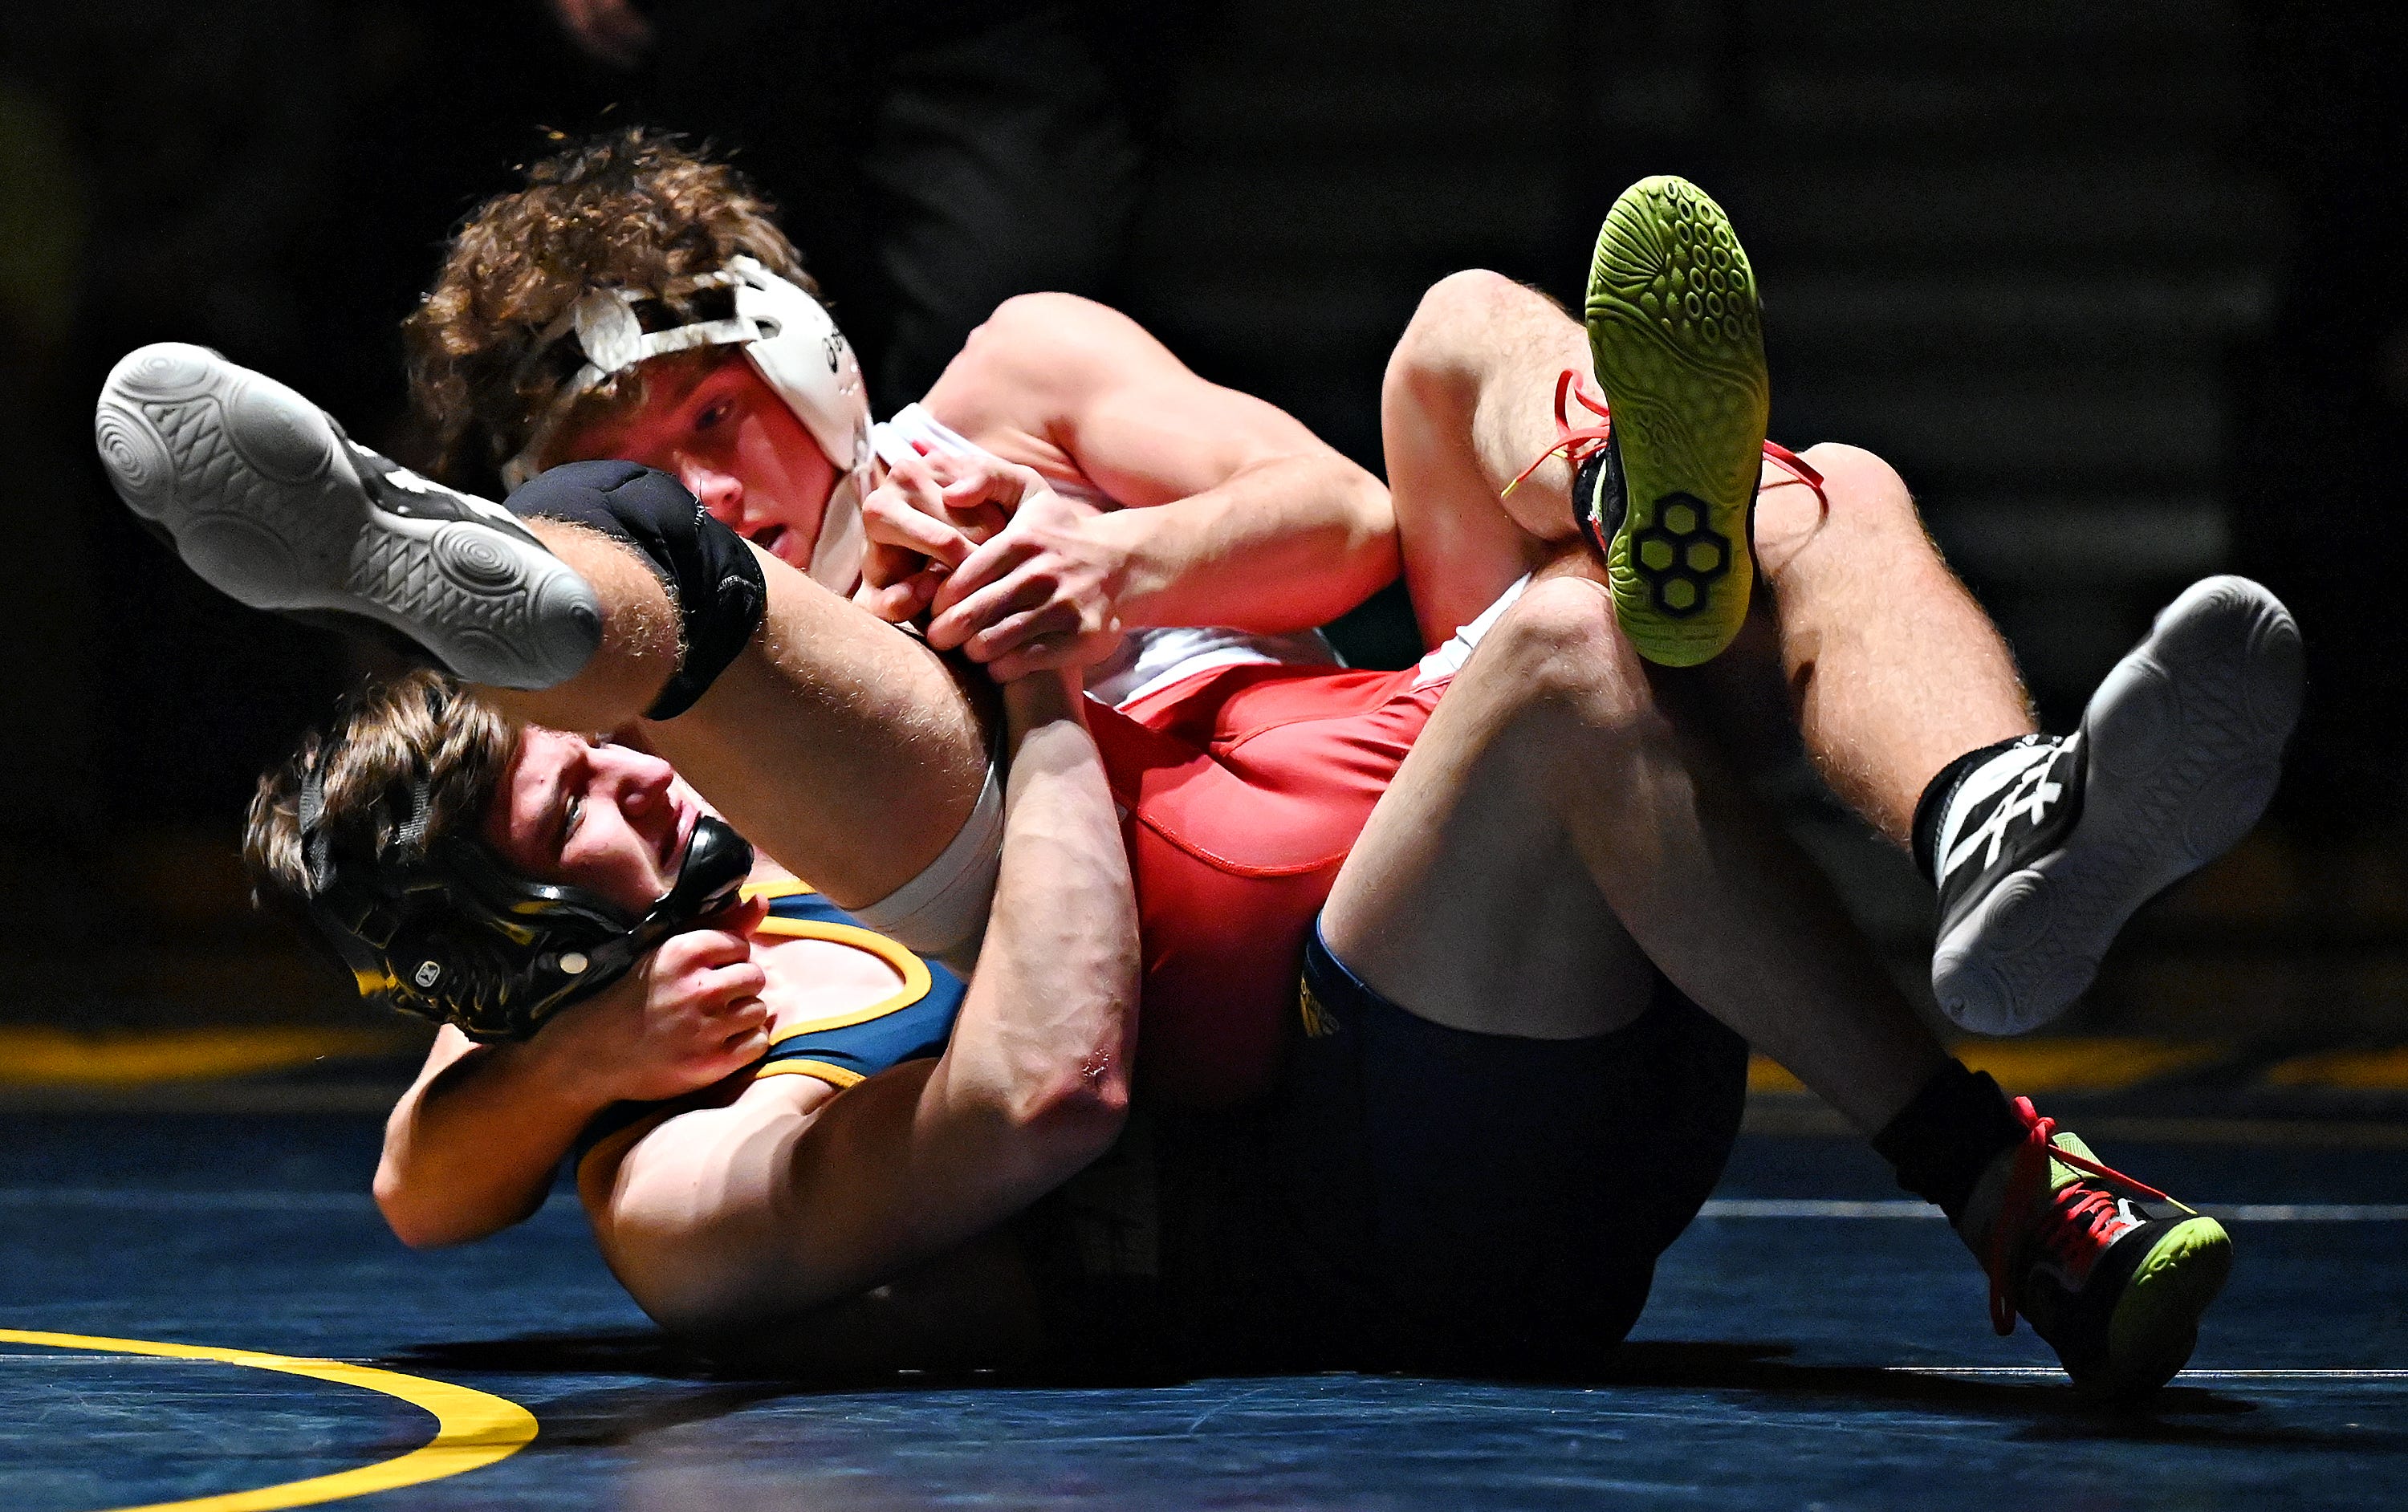 Eastern York’s Camron Weidlich, back, and Hamburg’s Daniel Brady compete in the 133-pound weight class during PIAA District 3, Class 2-A first round wrestling action at Eastern York High School in Lower Windsor Township, Monday, Jan. 30, 2023. Brady would win the match and Eastern York would win the meet 50-22. Dawn J. Sagert photo